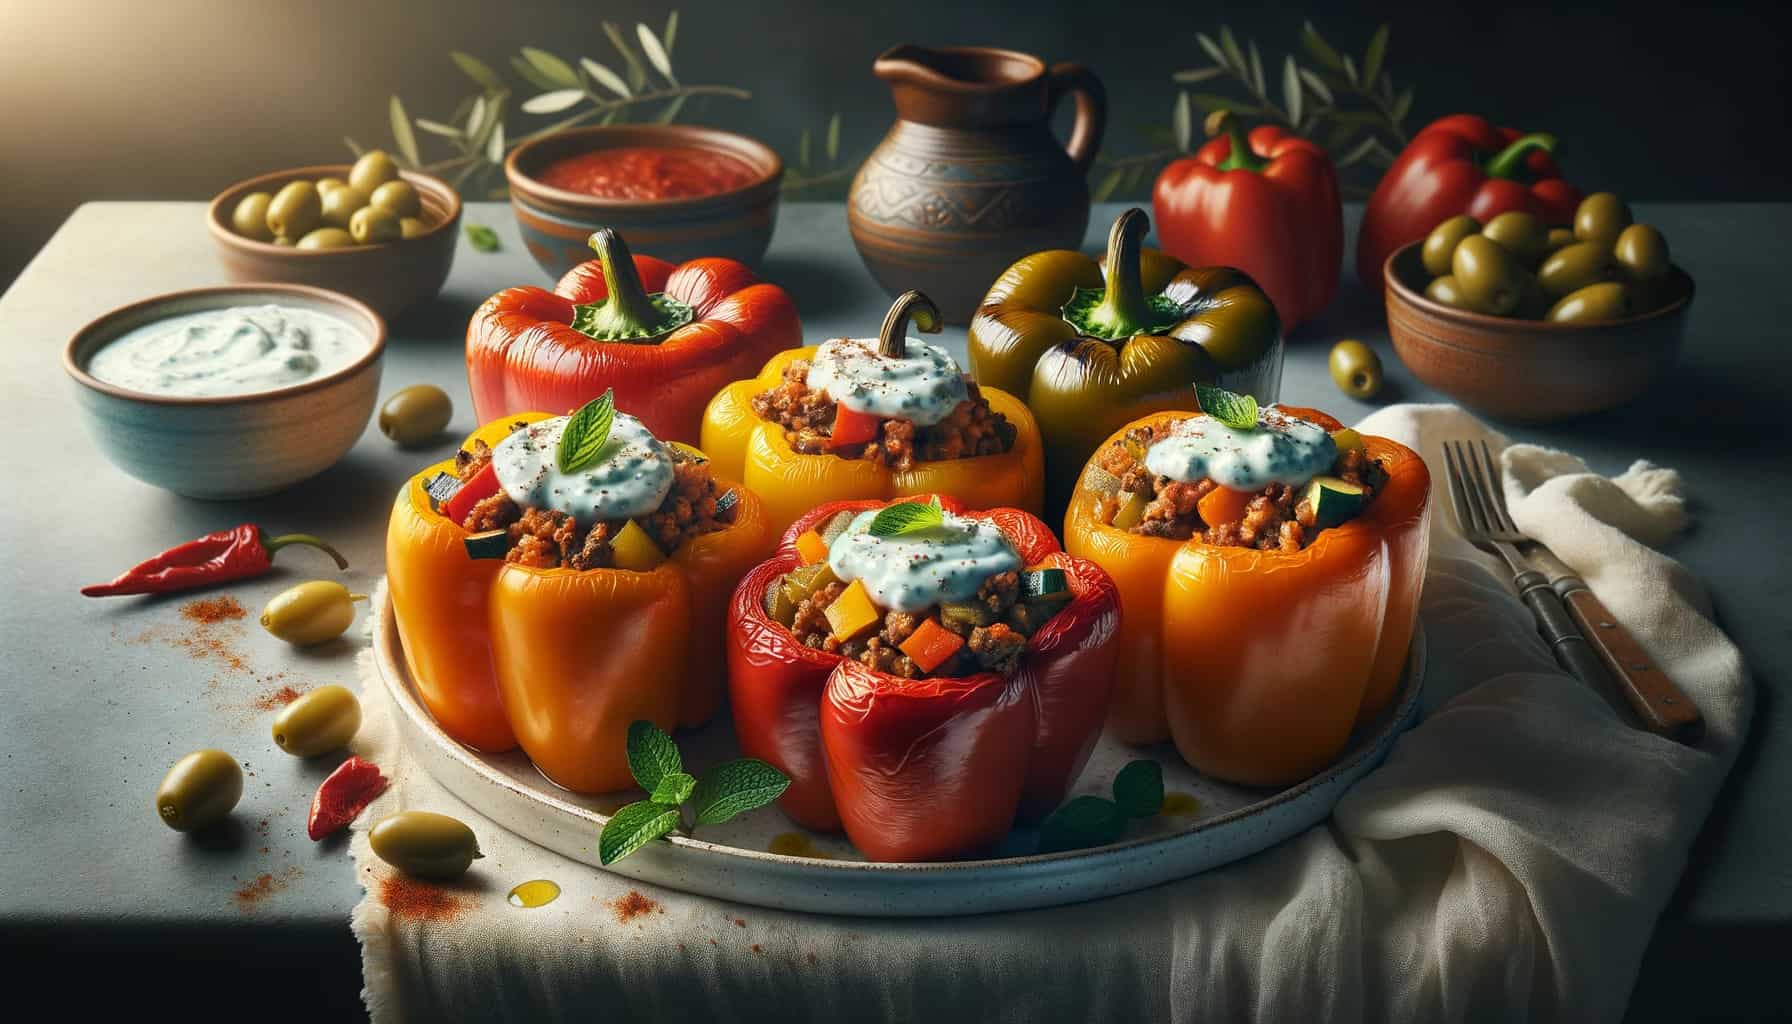 Mediterranean stuffed bell peppers arranged on a white ceramic plate. The bell peppers, with shades of orange, red, and yellow, are filled to the brim with a savory mix of ground lamb, rice, diced zucchini, and seasoned with mediterranean spices. A dollop of tzatziki sauce and a sprinkle of chopped mint leaves enhance the flavors.